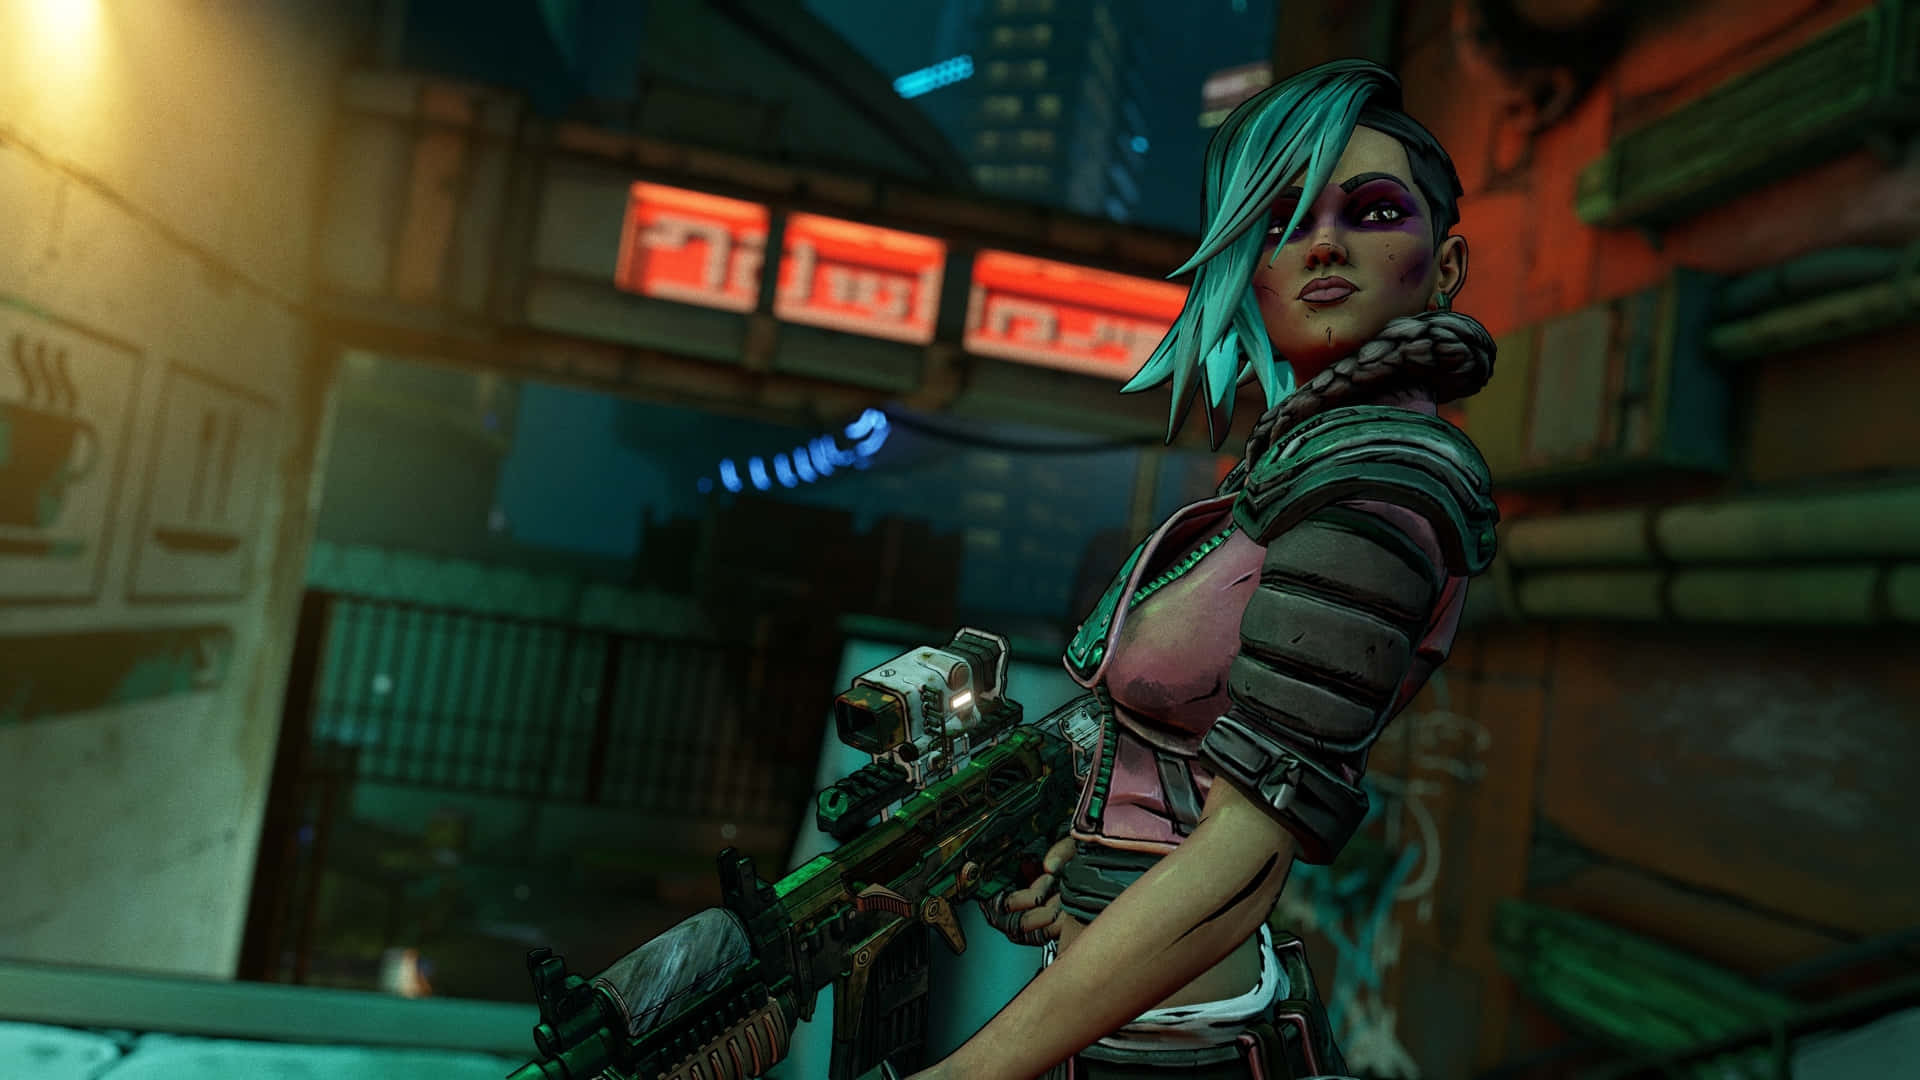 The world of HD Borderlands 3 comes alive in stunning graphic detail